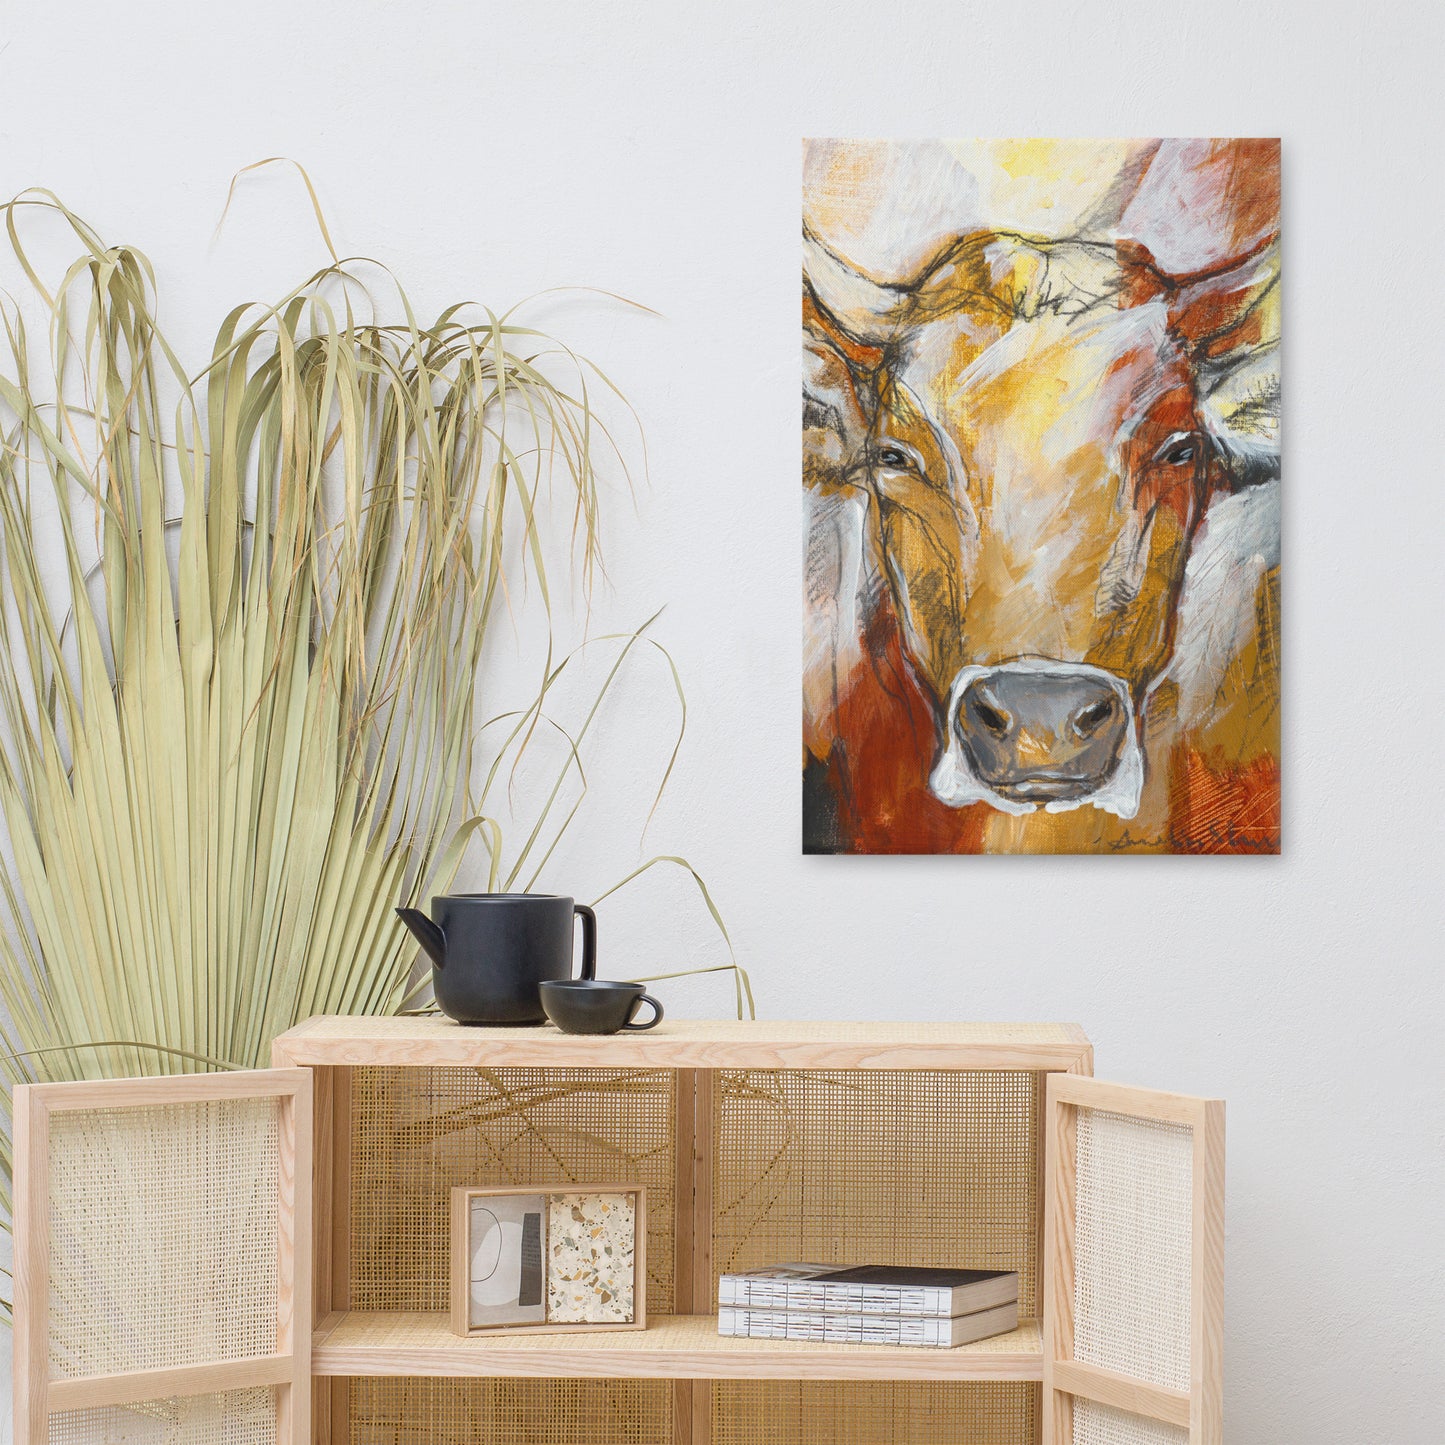 Animal canvas print - Innsbruck cow "Resi" in a frenzy of colour